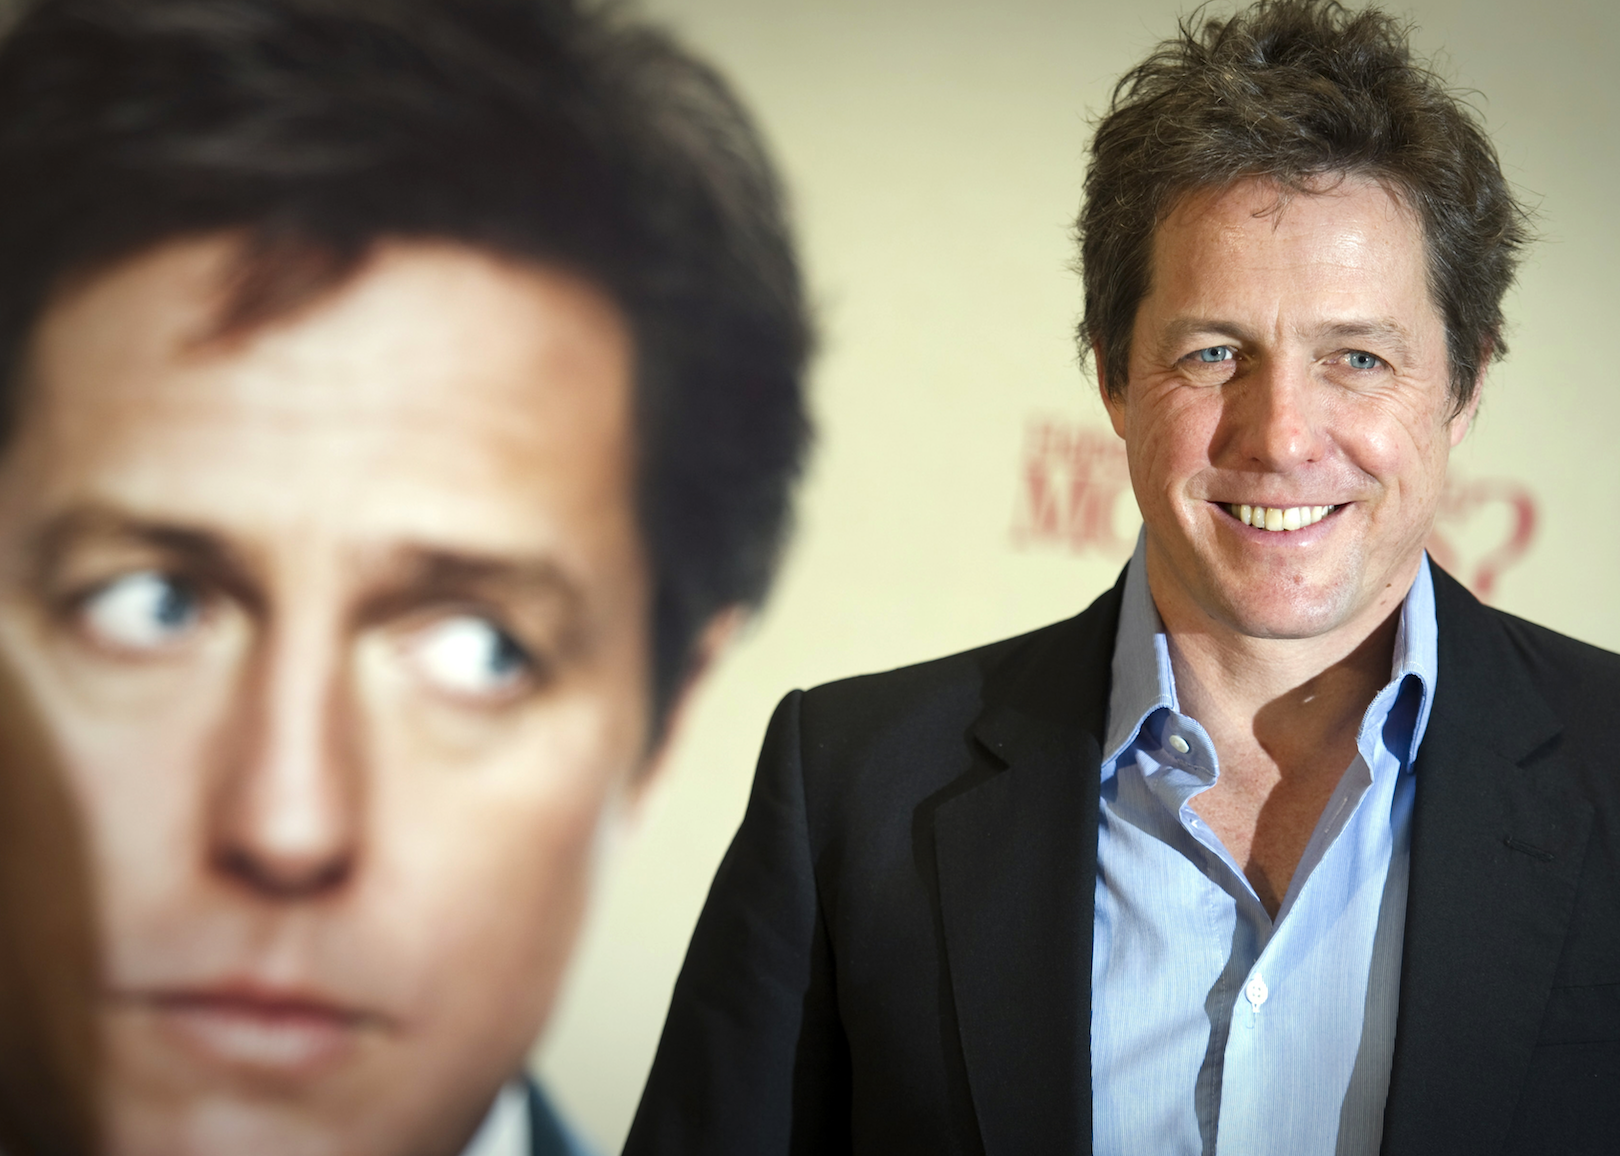 Hugh Grant smiling in front of a background poster of himself.